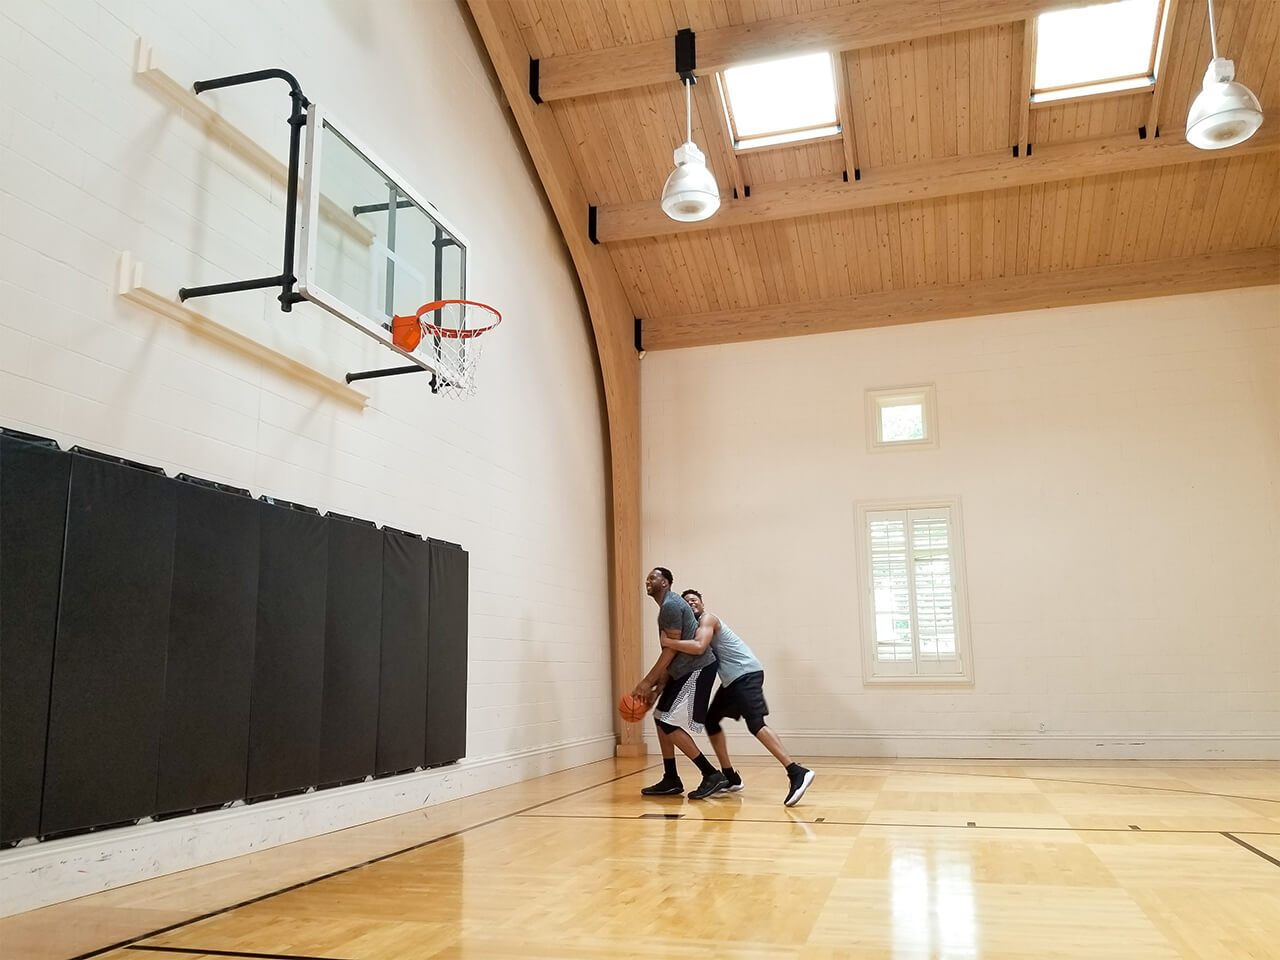 Houston, TX: Draft prospect Markelle Fultz joins McGrady on his home court for some drills. - Captured on a Samsung Galaxy S8